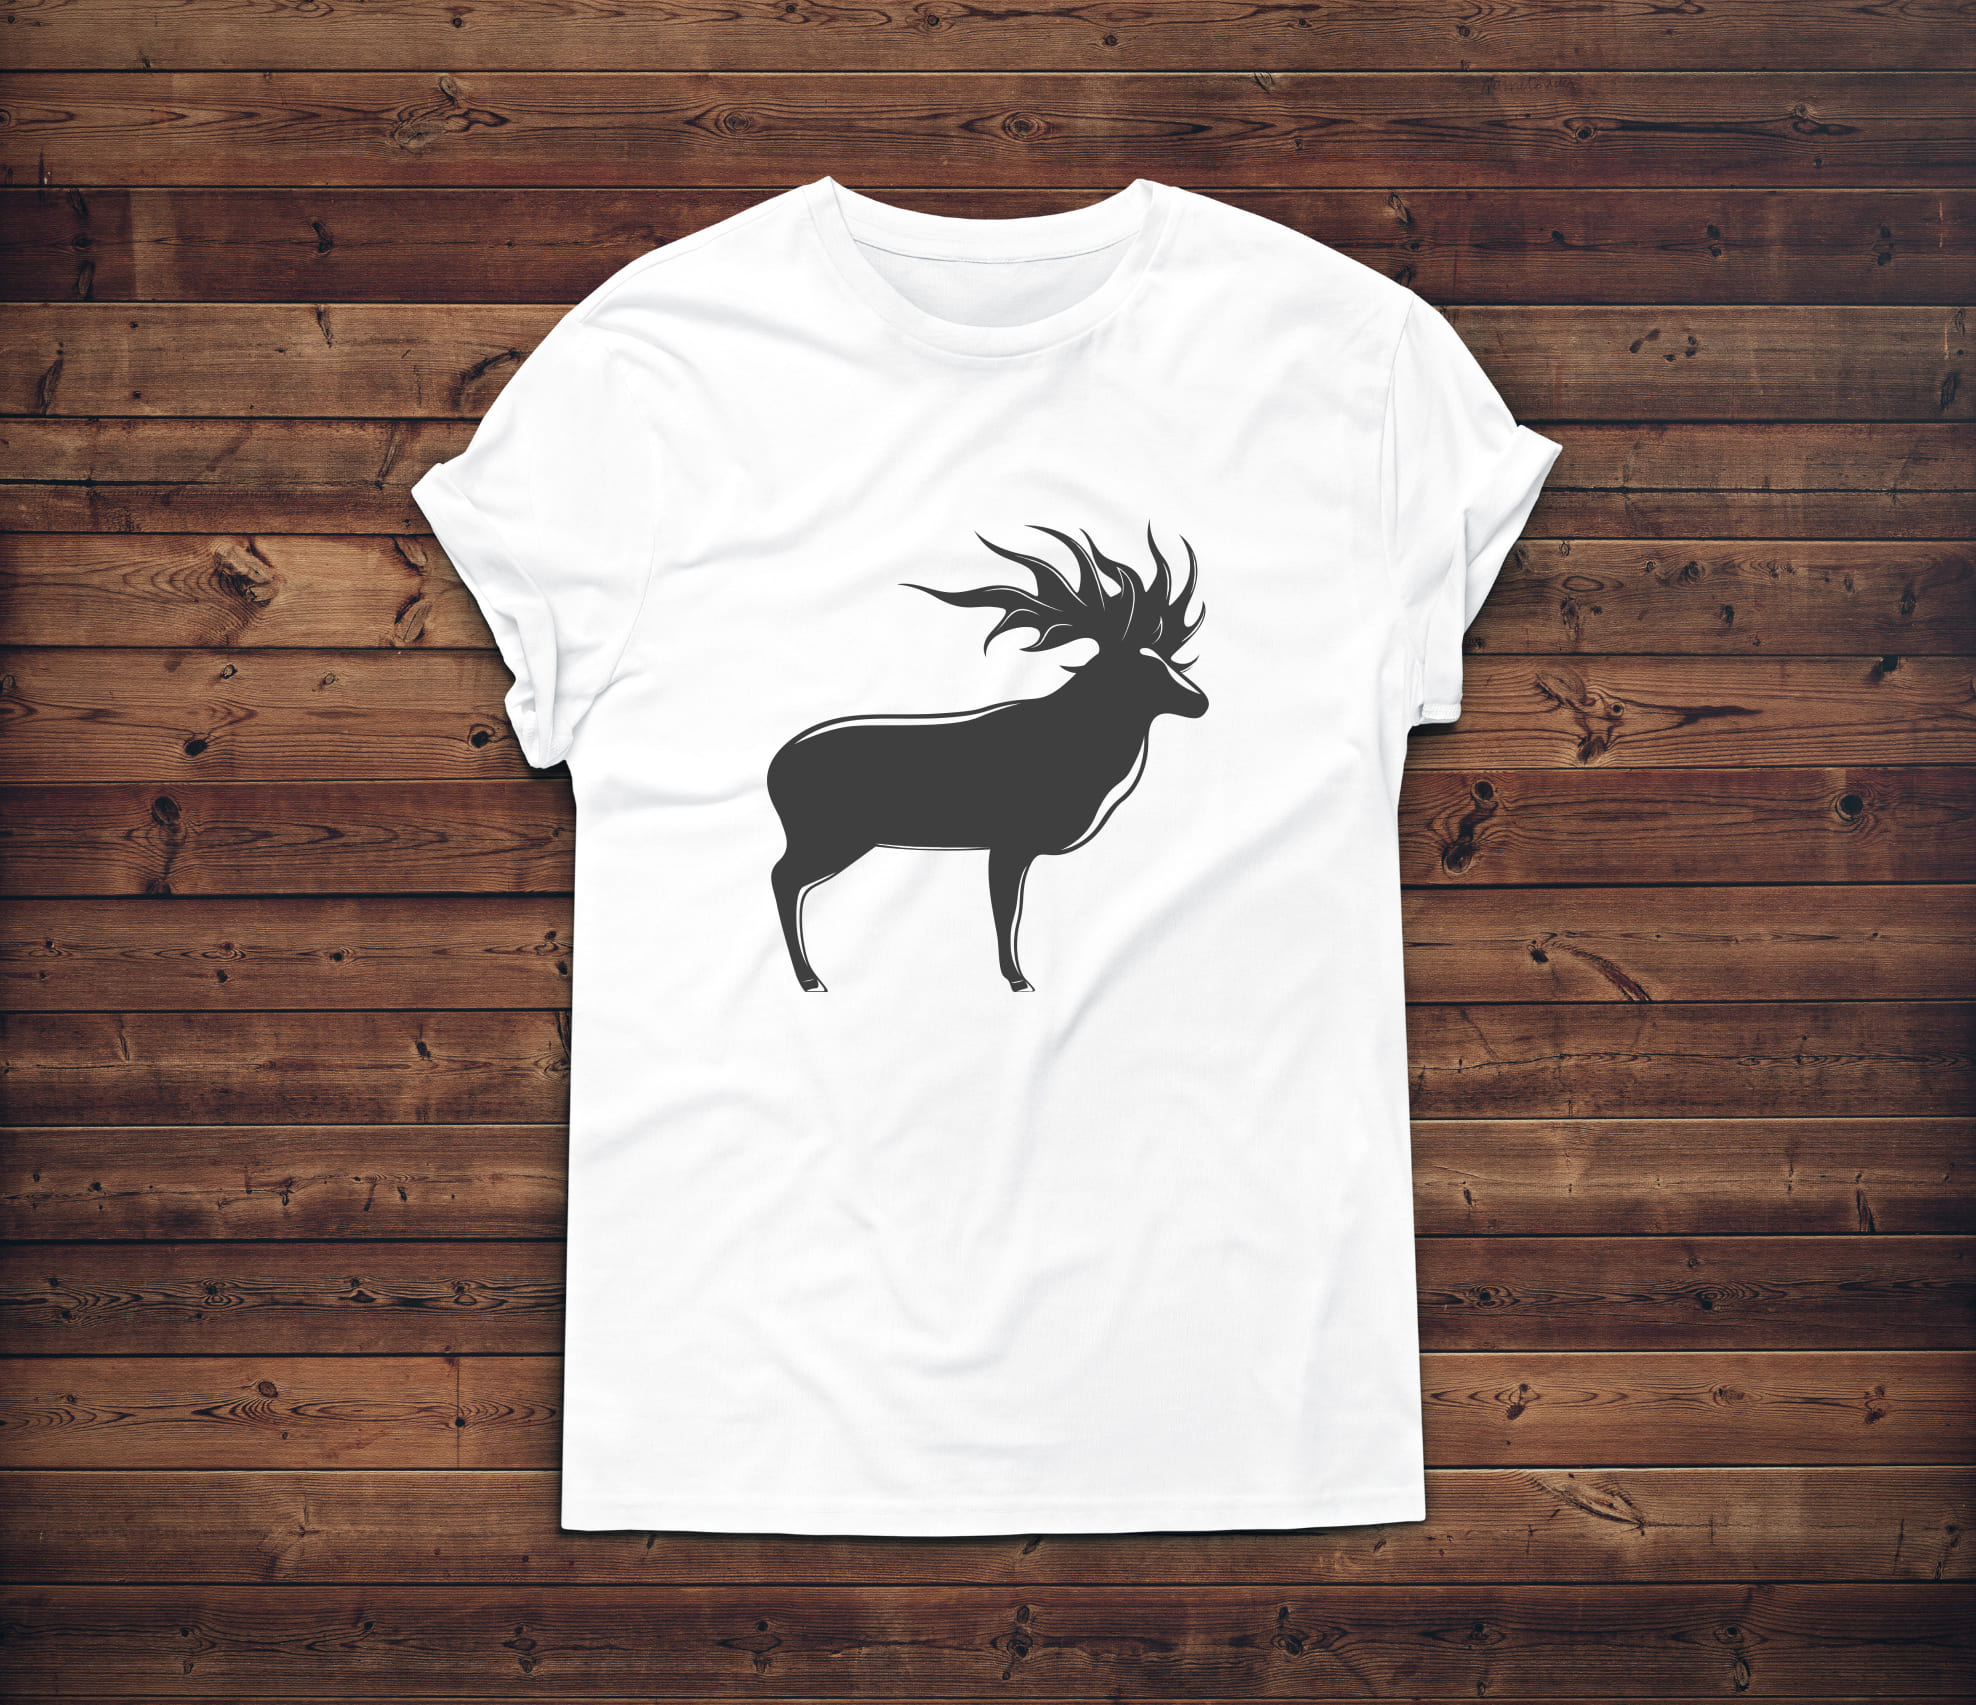 Image of a white t-shirt with a gorgeous deer silhouette print.